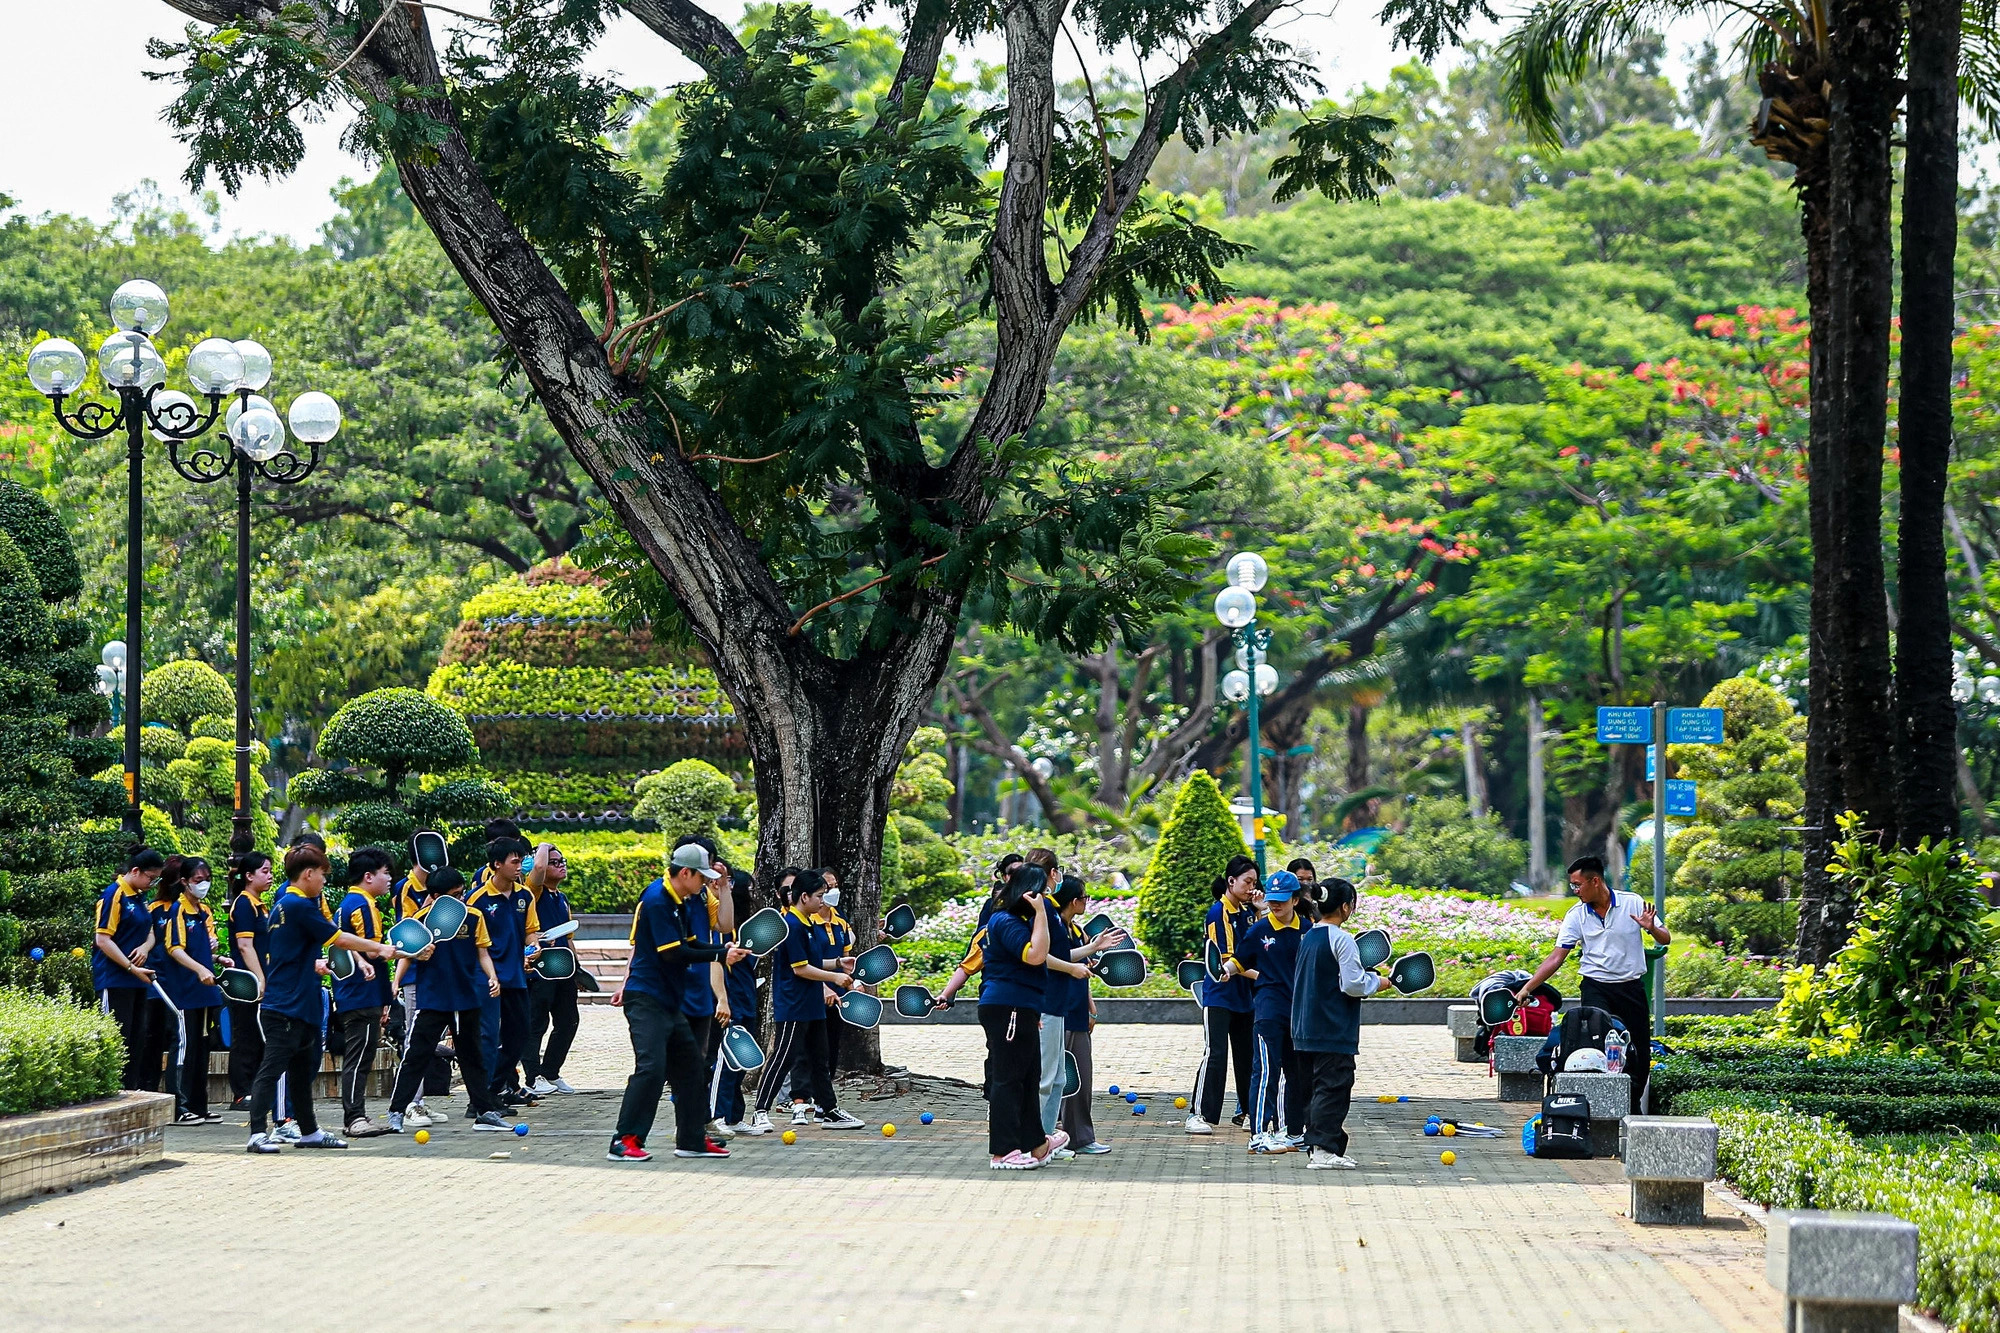 Another shady park that people looking for a way to escape the heat wave should not miss out on is the Gia Dinh Park in Go Vap District. Also dubbed “the green lung” of the southern city, the park offers huge green spaces and remains among the top destinations for those who find shady spots for relaxing and taking part in sports activities. Photo: Phuong Quyen / Tuoi Tre